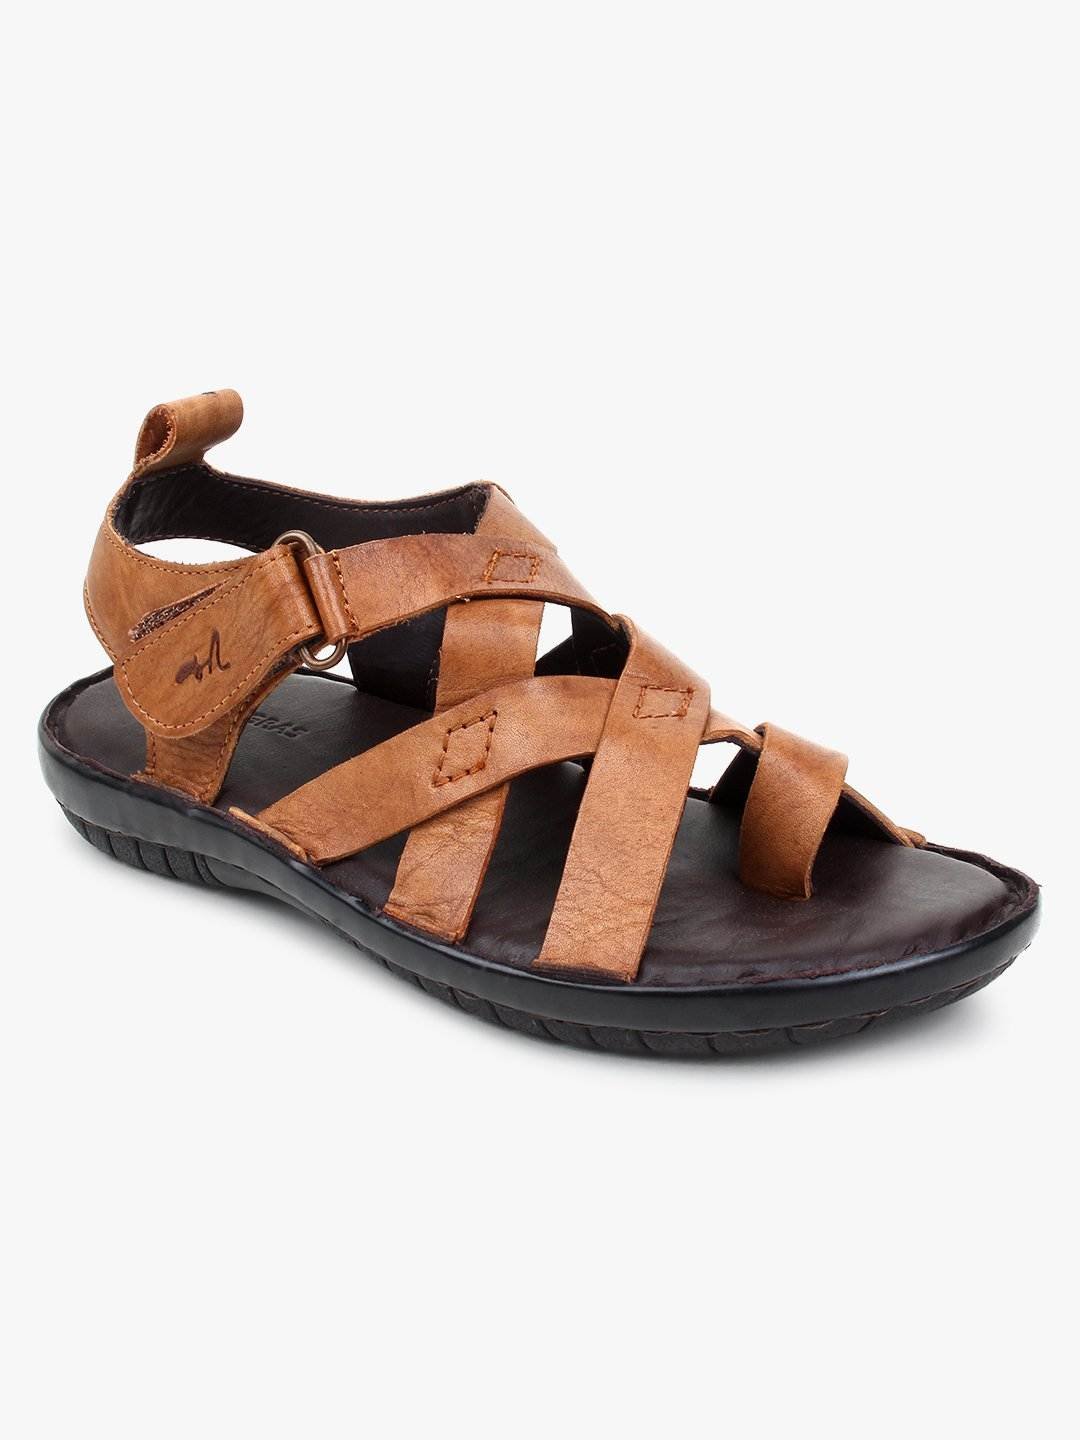 MARDI GRAS Youth Sandals, Stylish Kids Footware In Brown Leather Open Toed  Sandals - Durable PU Sole and Comfortable Leather Lining : Amazon.in:  Fashion